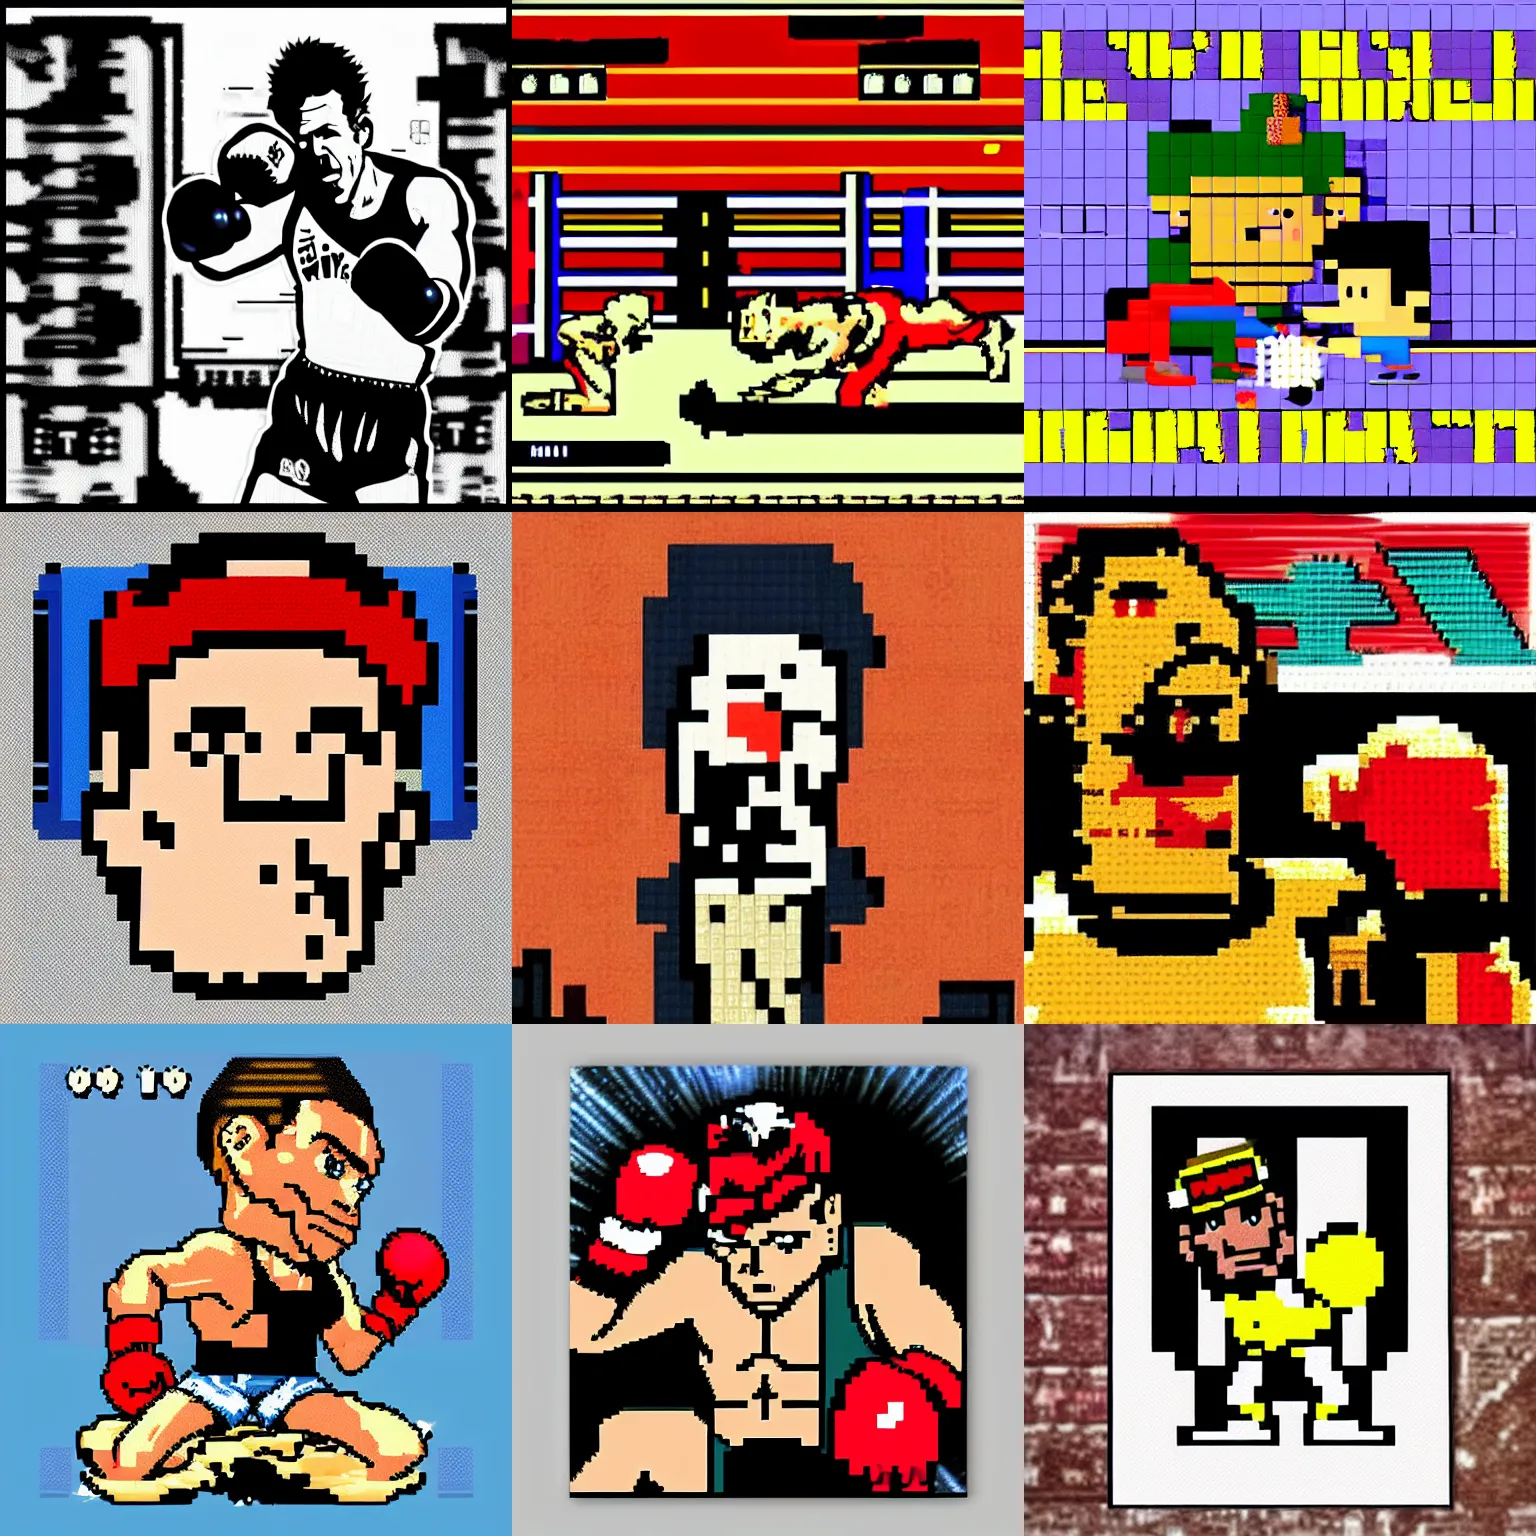 Prompt: 8 bit Tom Waits as a boxer in Nintendo Mike Tyson’s Punch Out